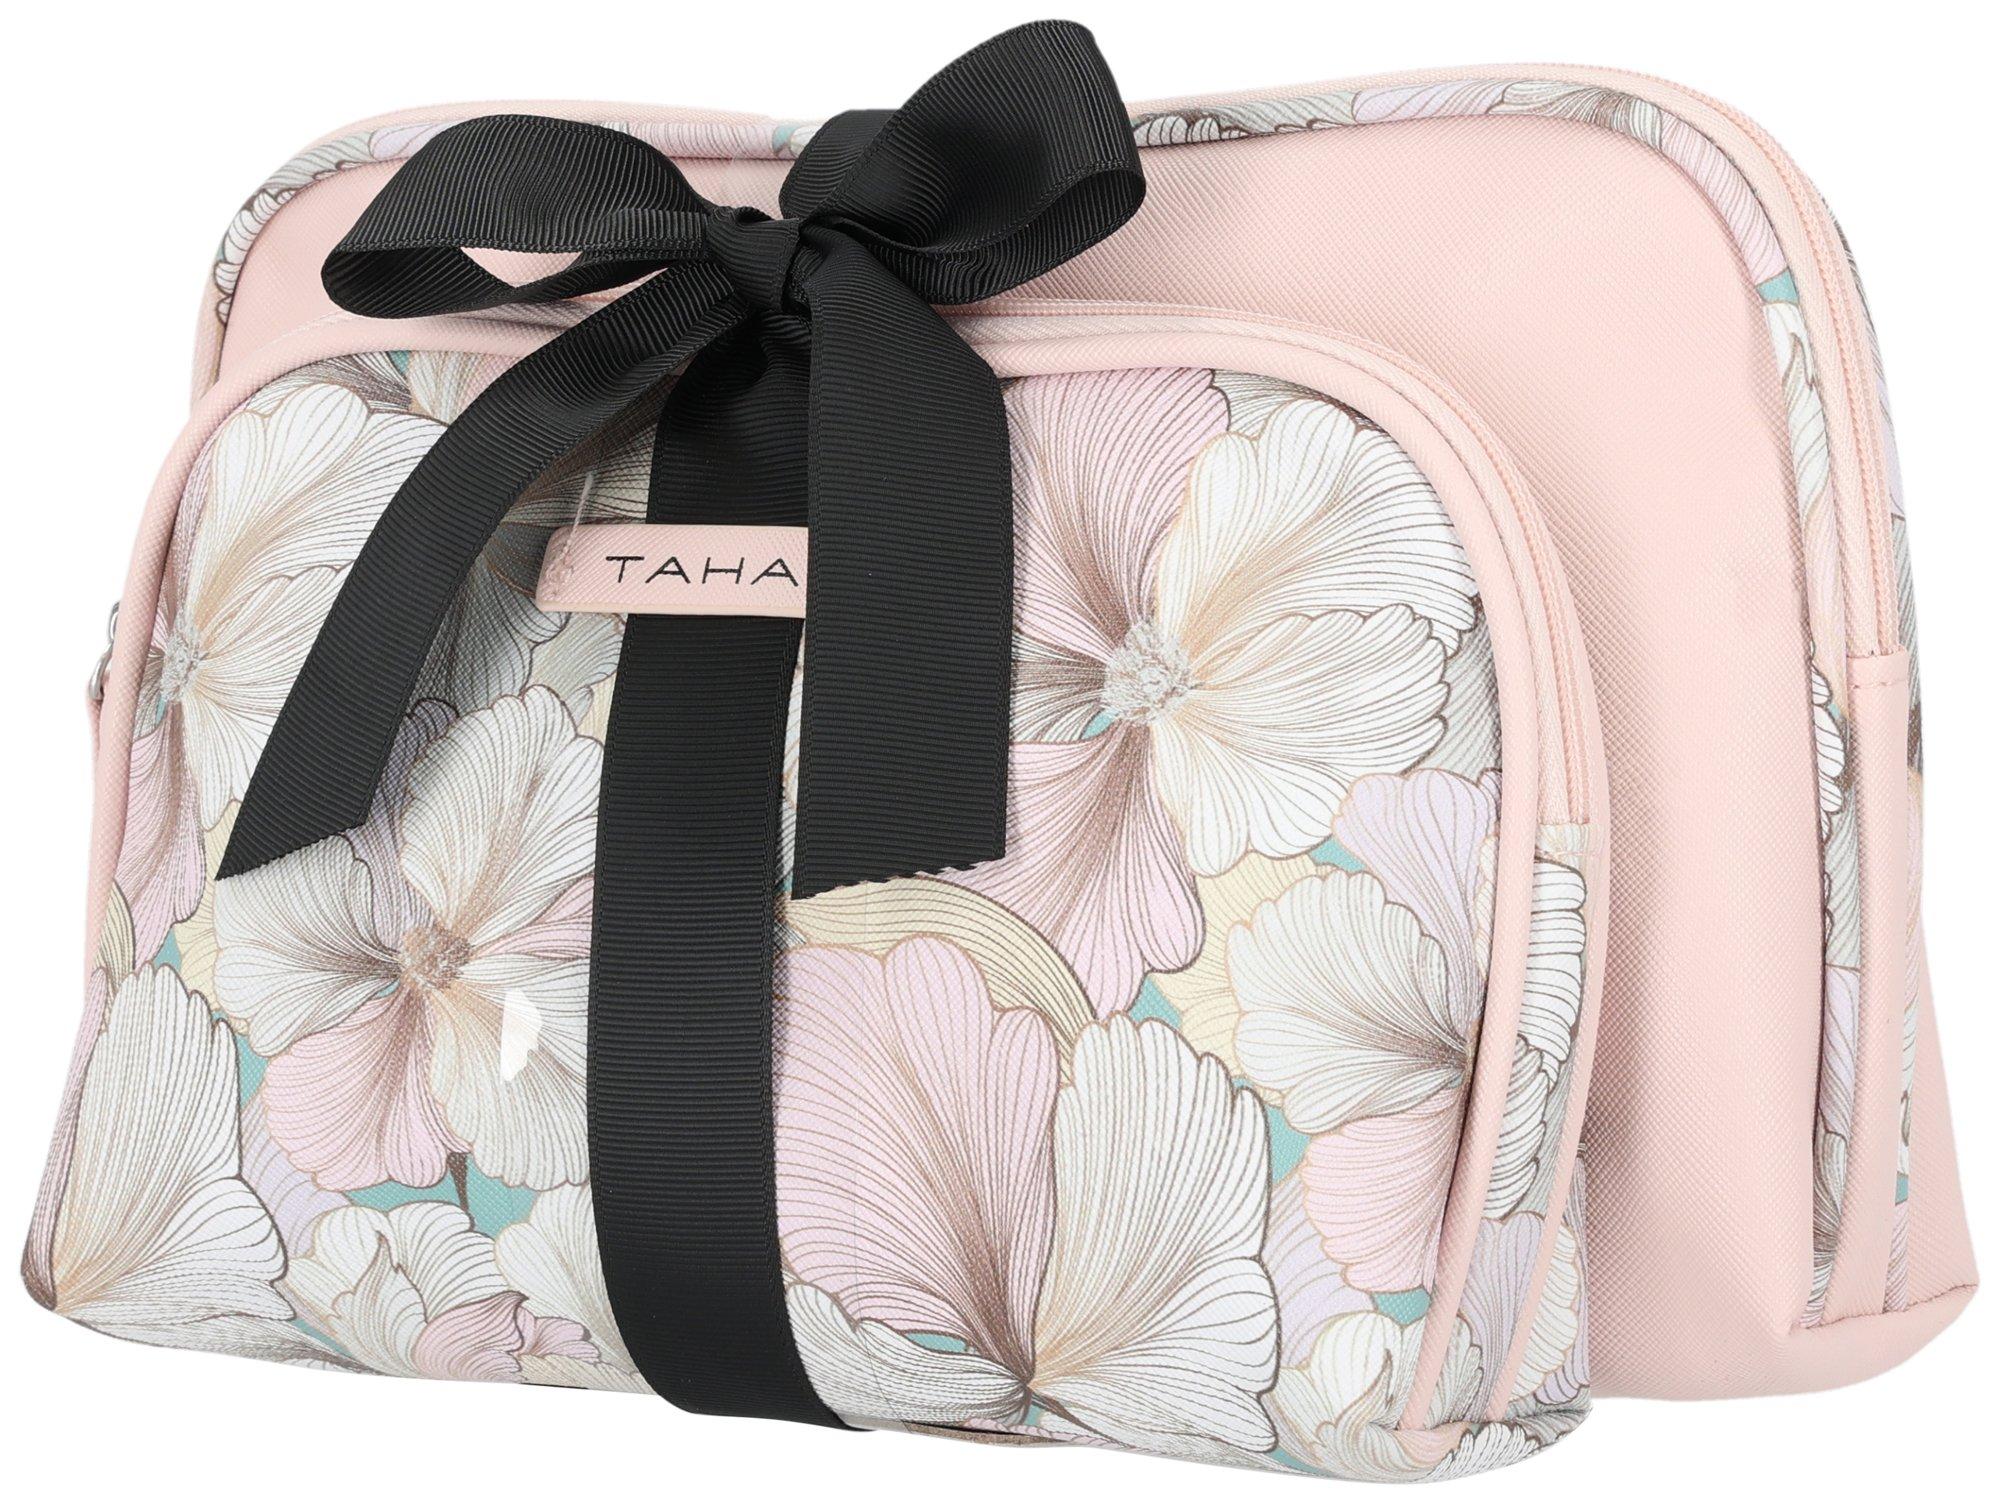 Tahari 2 Pc. Floral & Solid Cosmetic Case Set